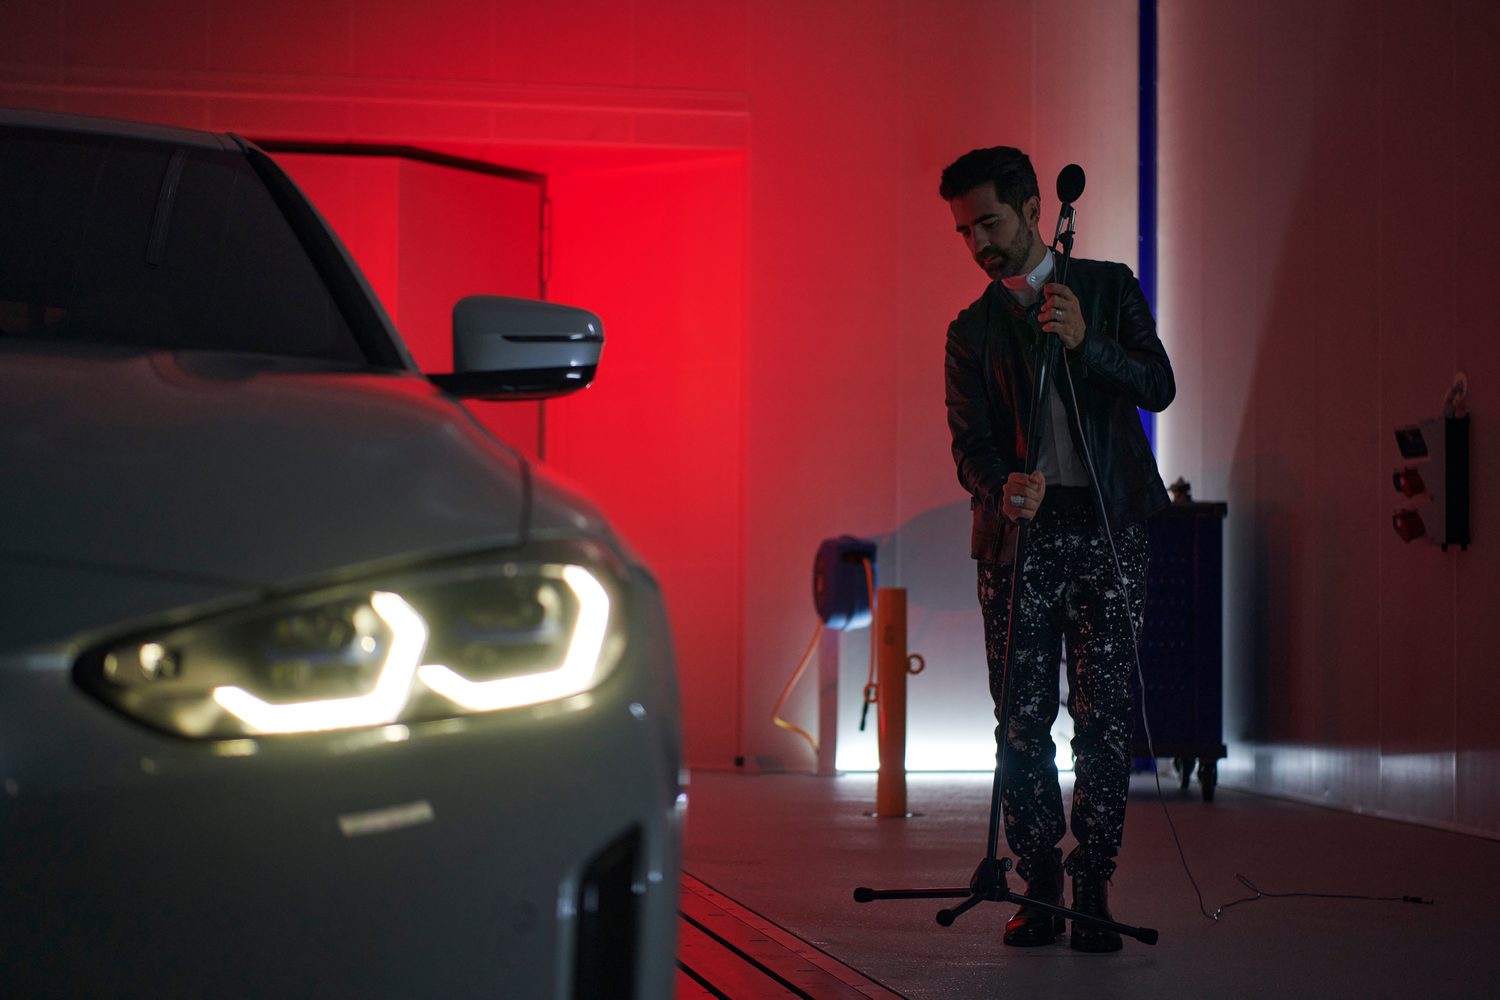 BMW brings art and relaxation to the car